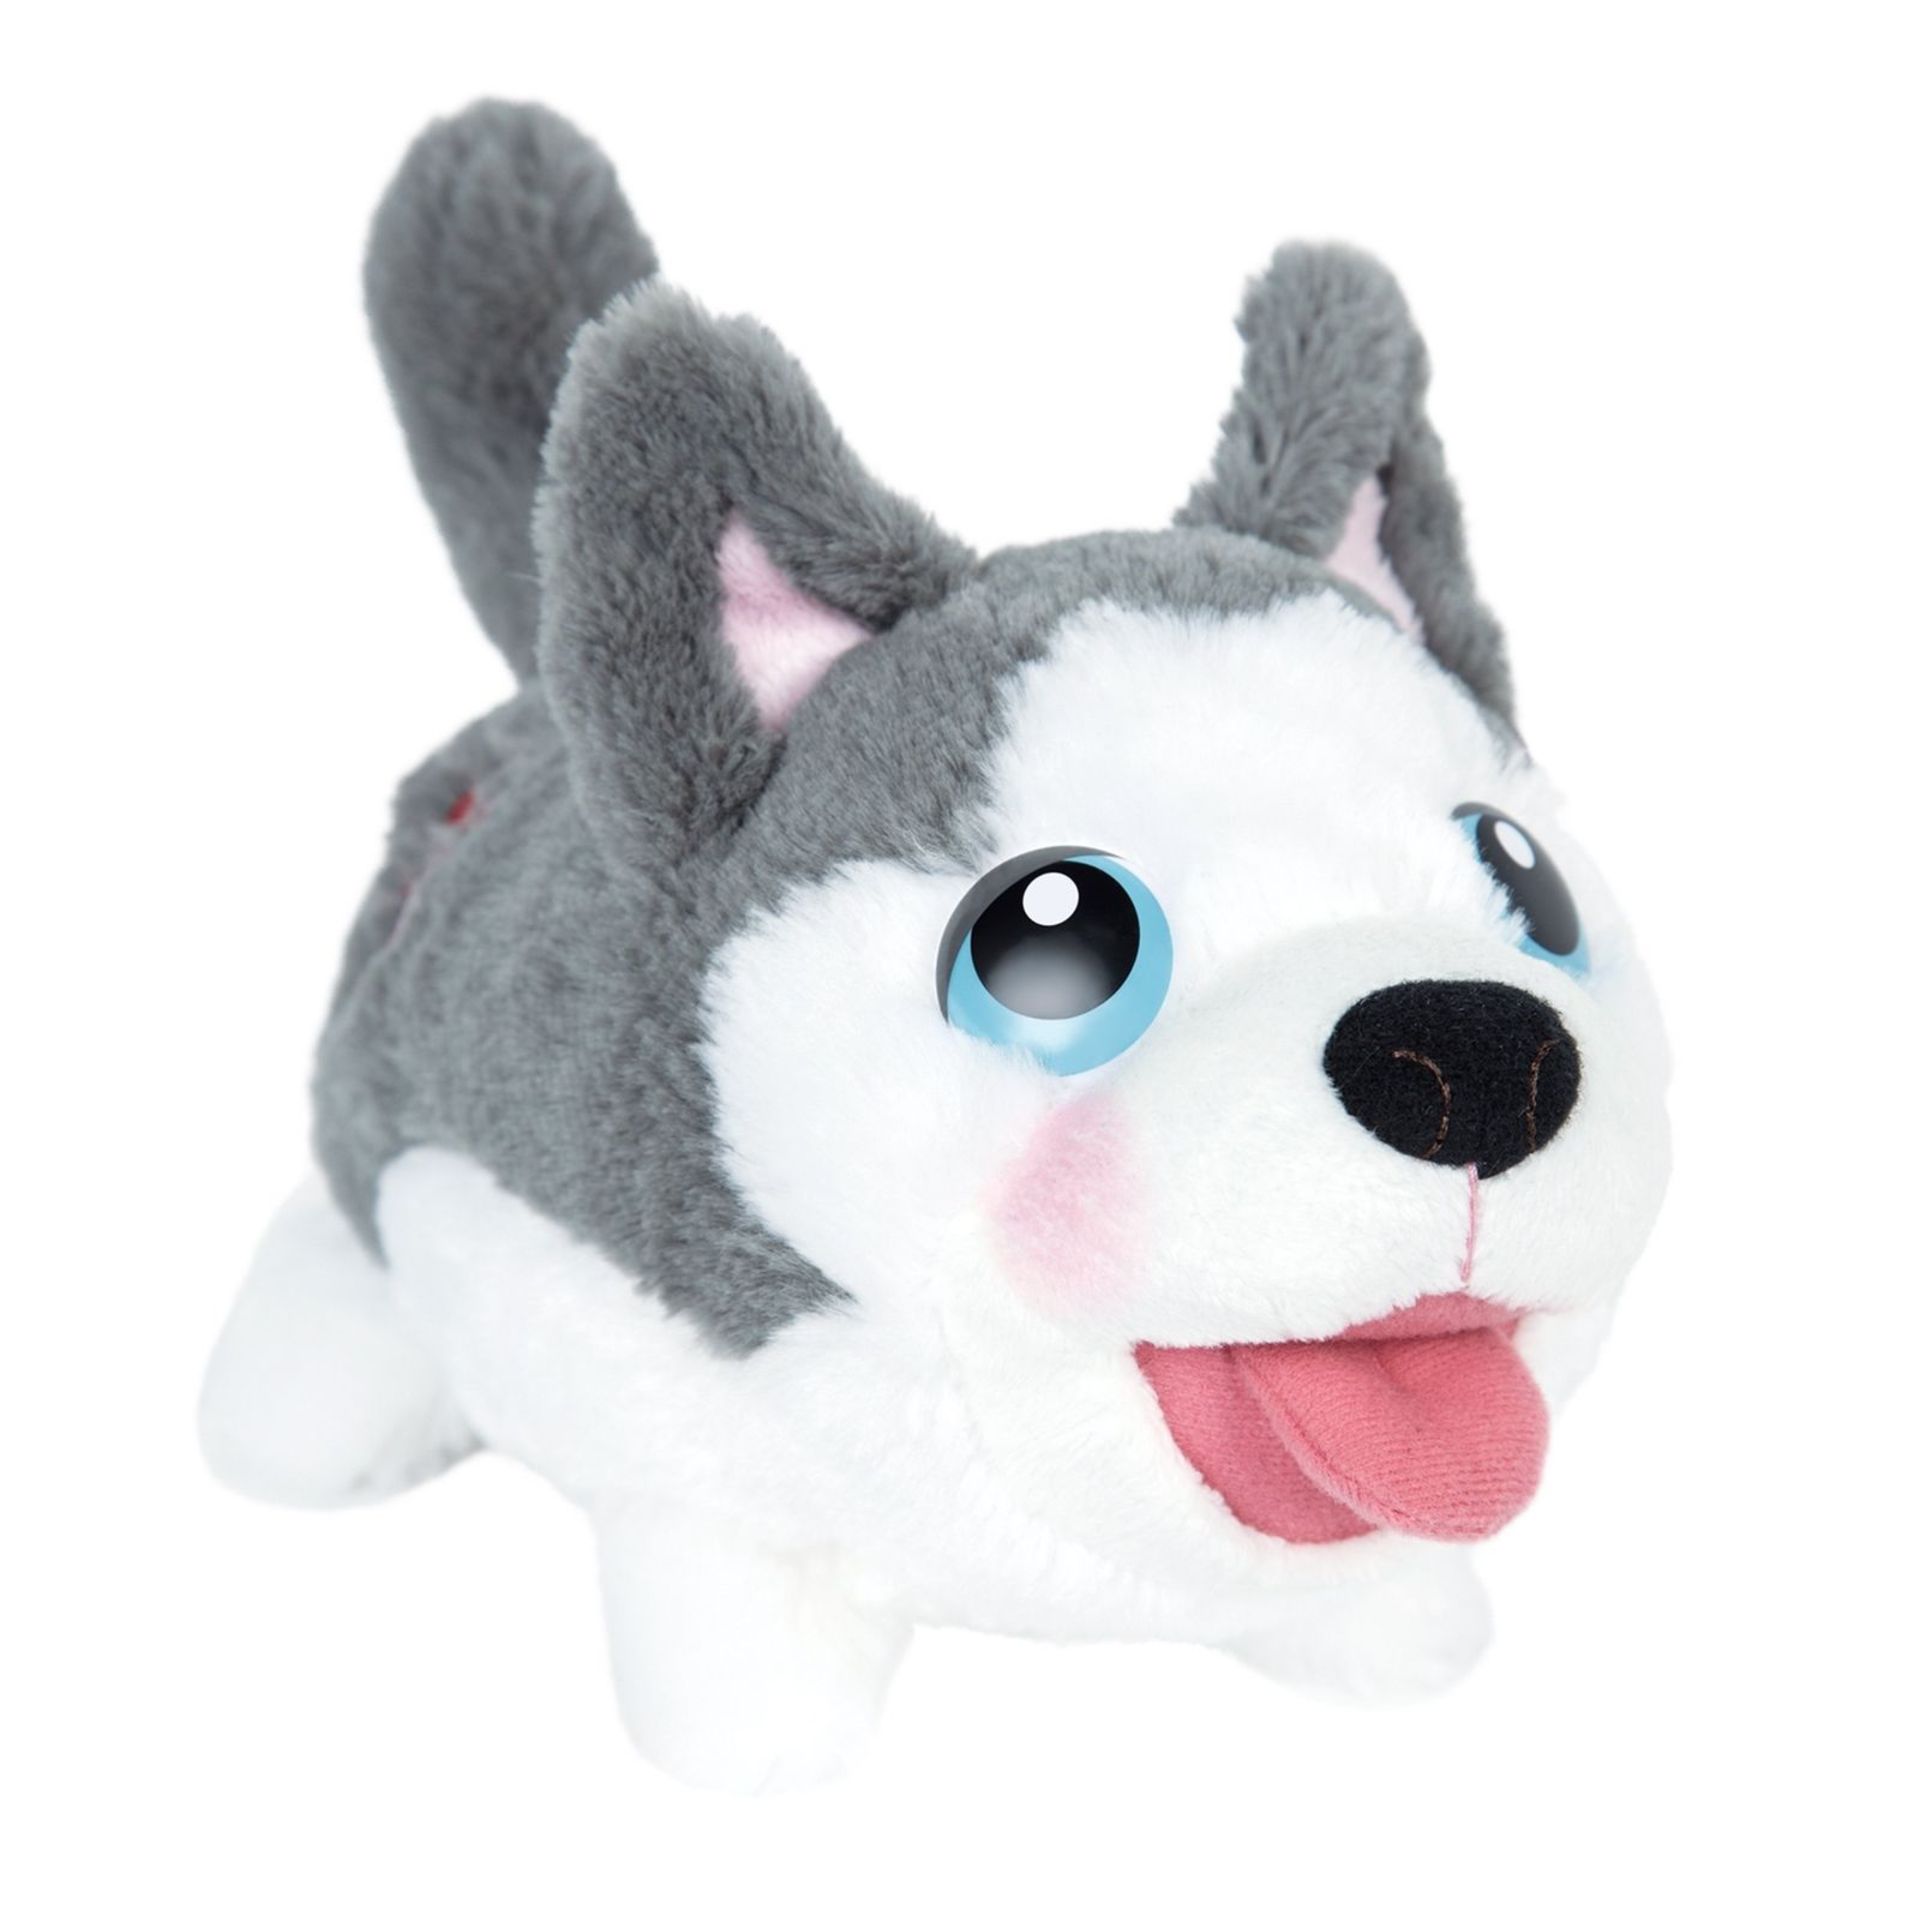 V Brand New Chubby Puppies & Friends - Husky - Storkz.com Price £24.83 - Moves When You Press Button - Image 3 of 3